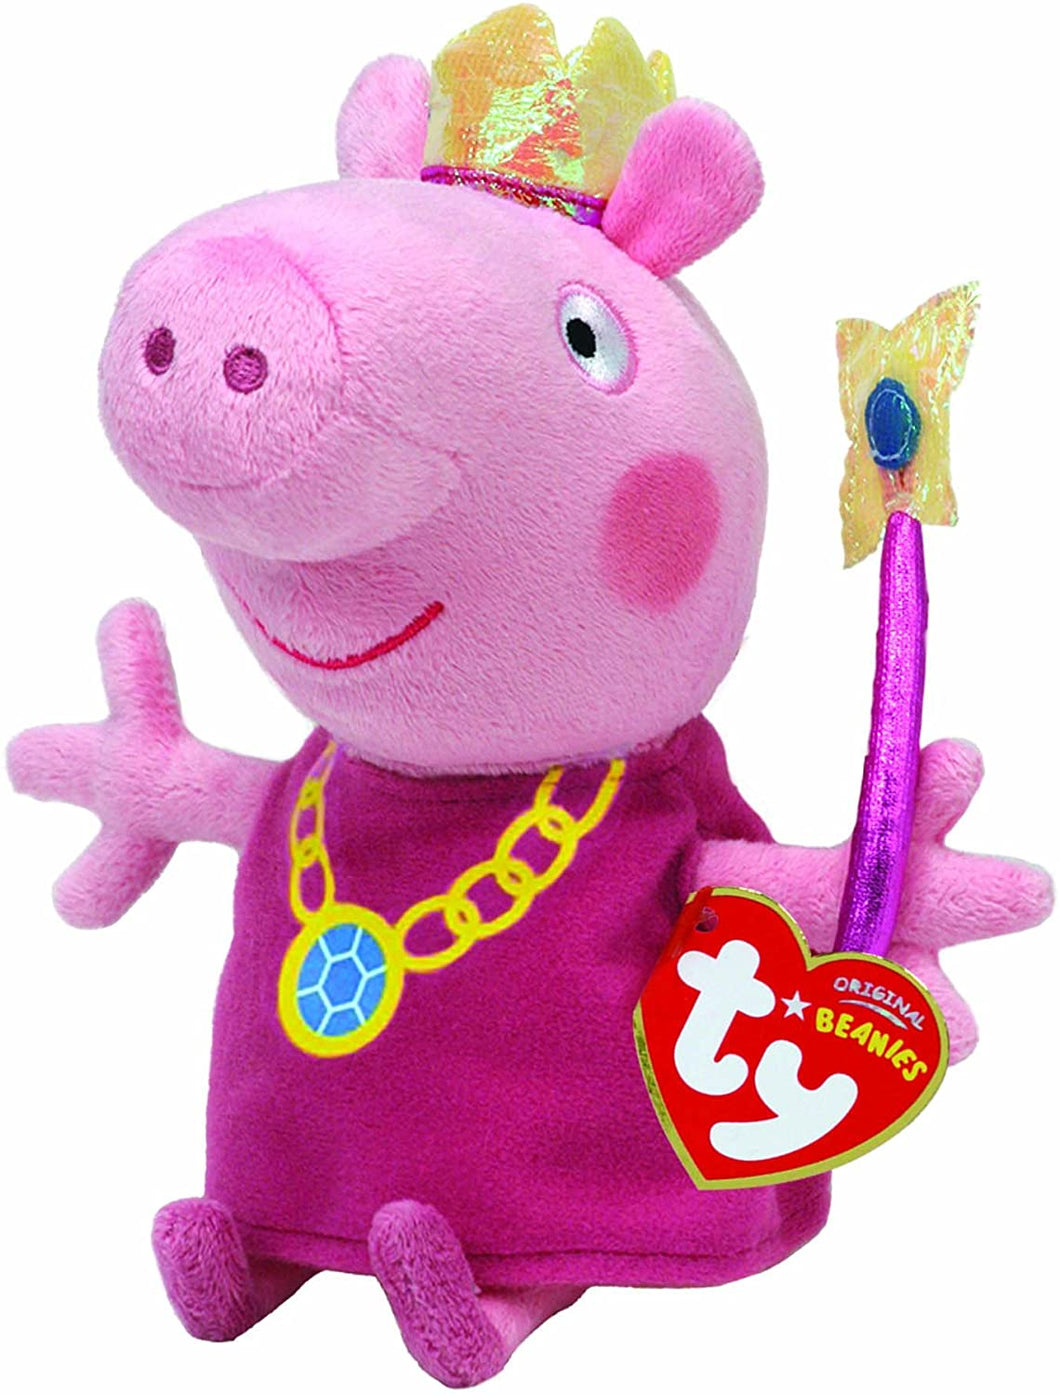 Peppa Pig Princess Peppa Beanie Baby The Bubble Room Toy Store Dublin